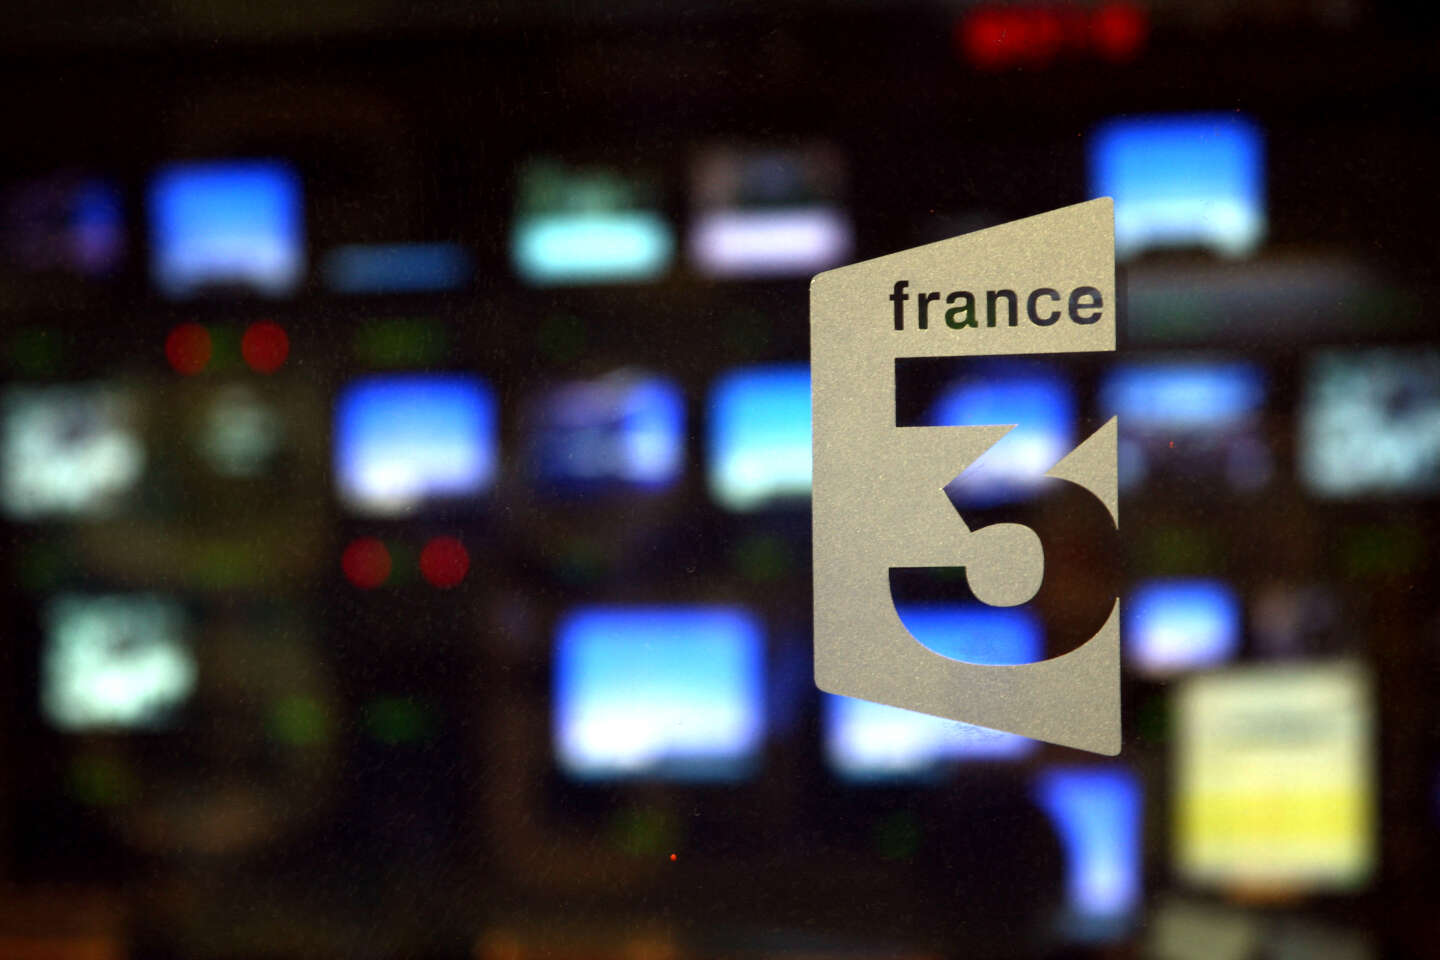 Bomb alert on France 3 during live broadcast of Gérard Collomb’s funeral